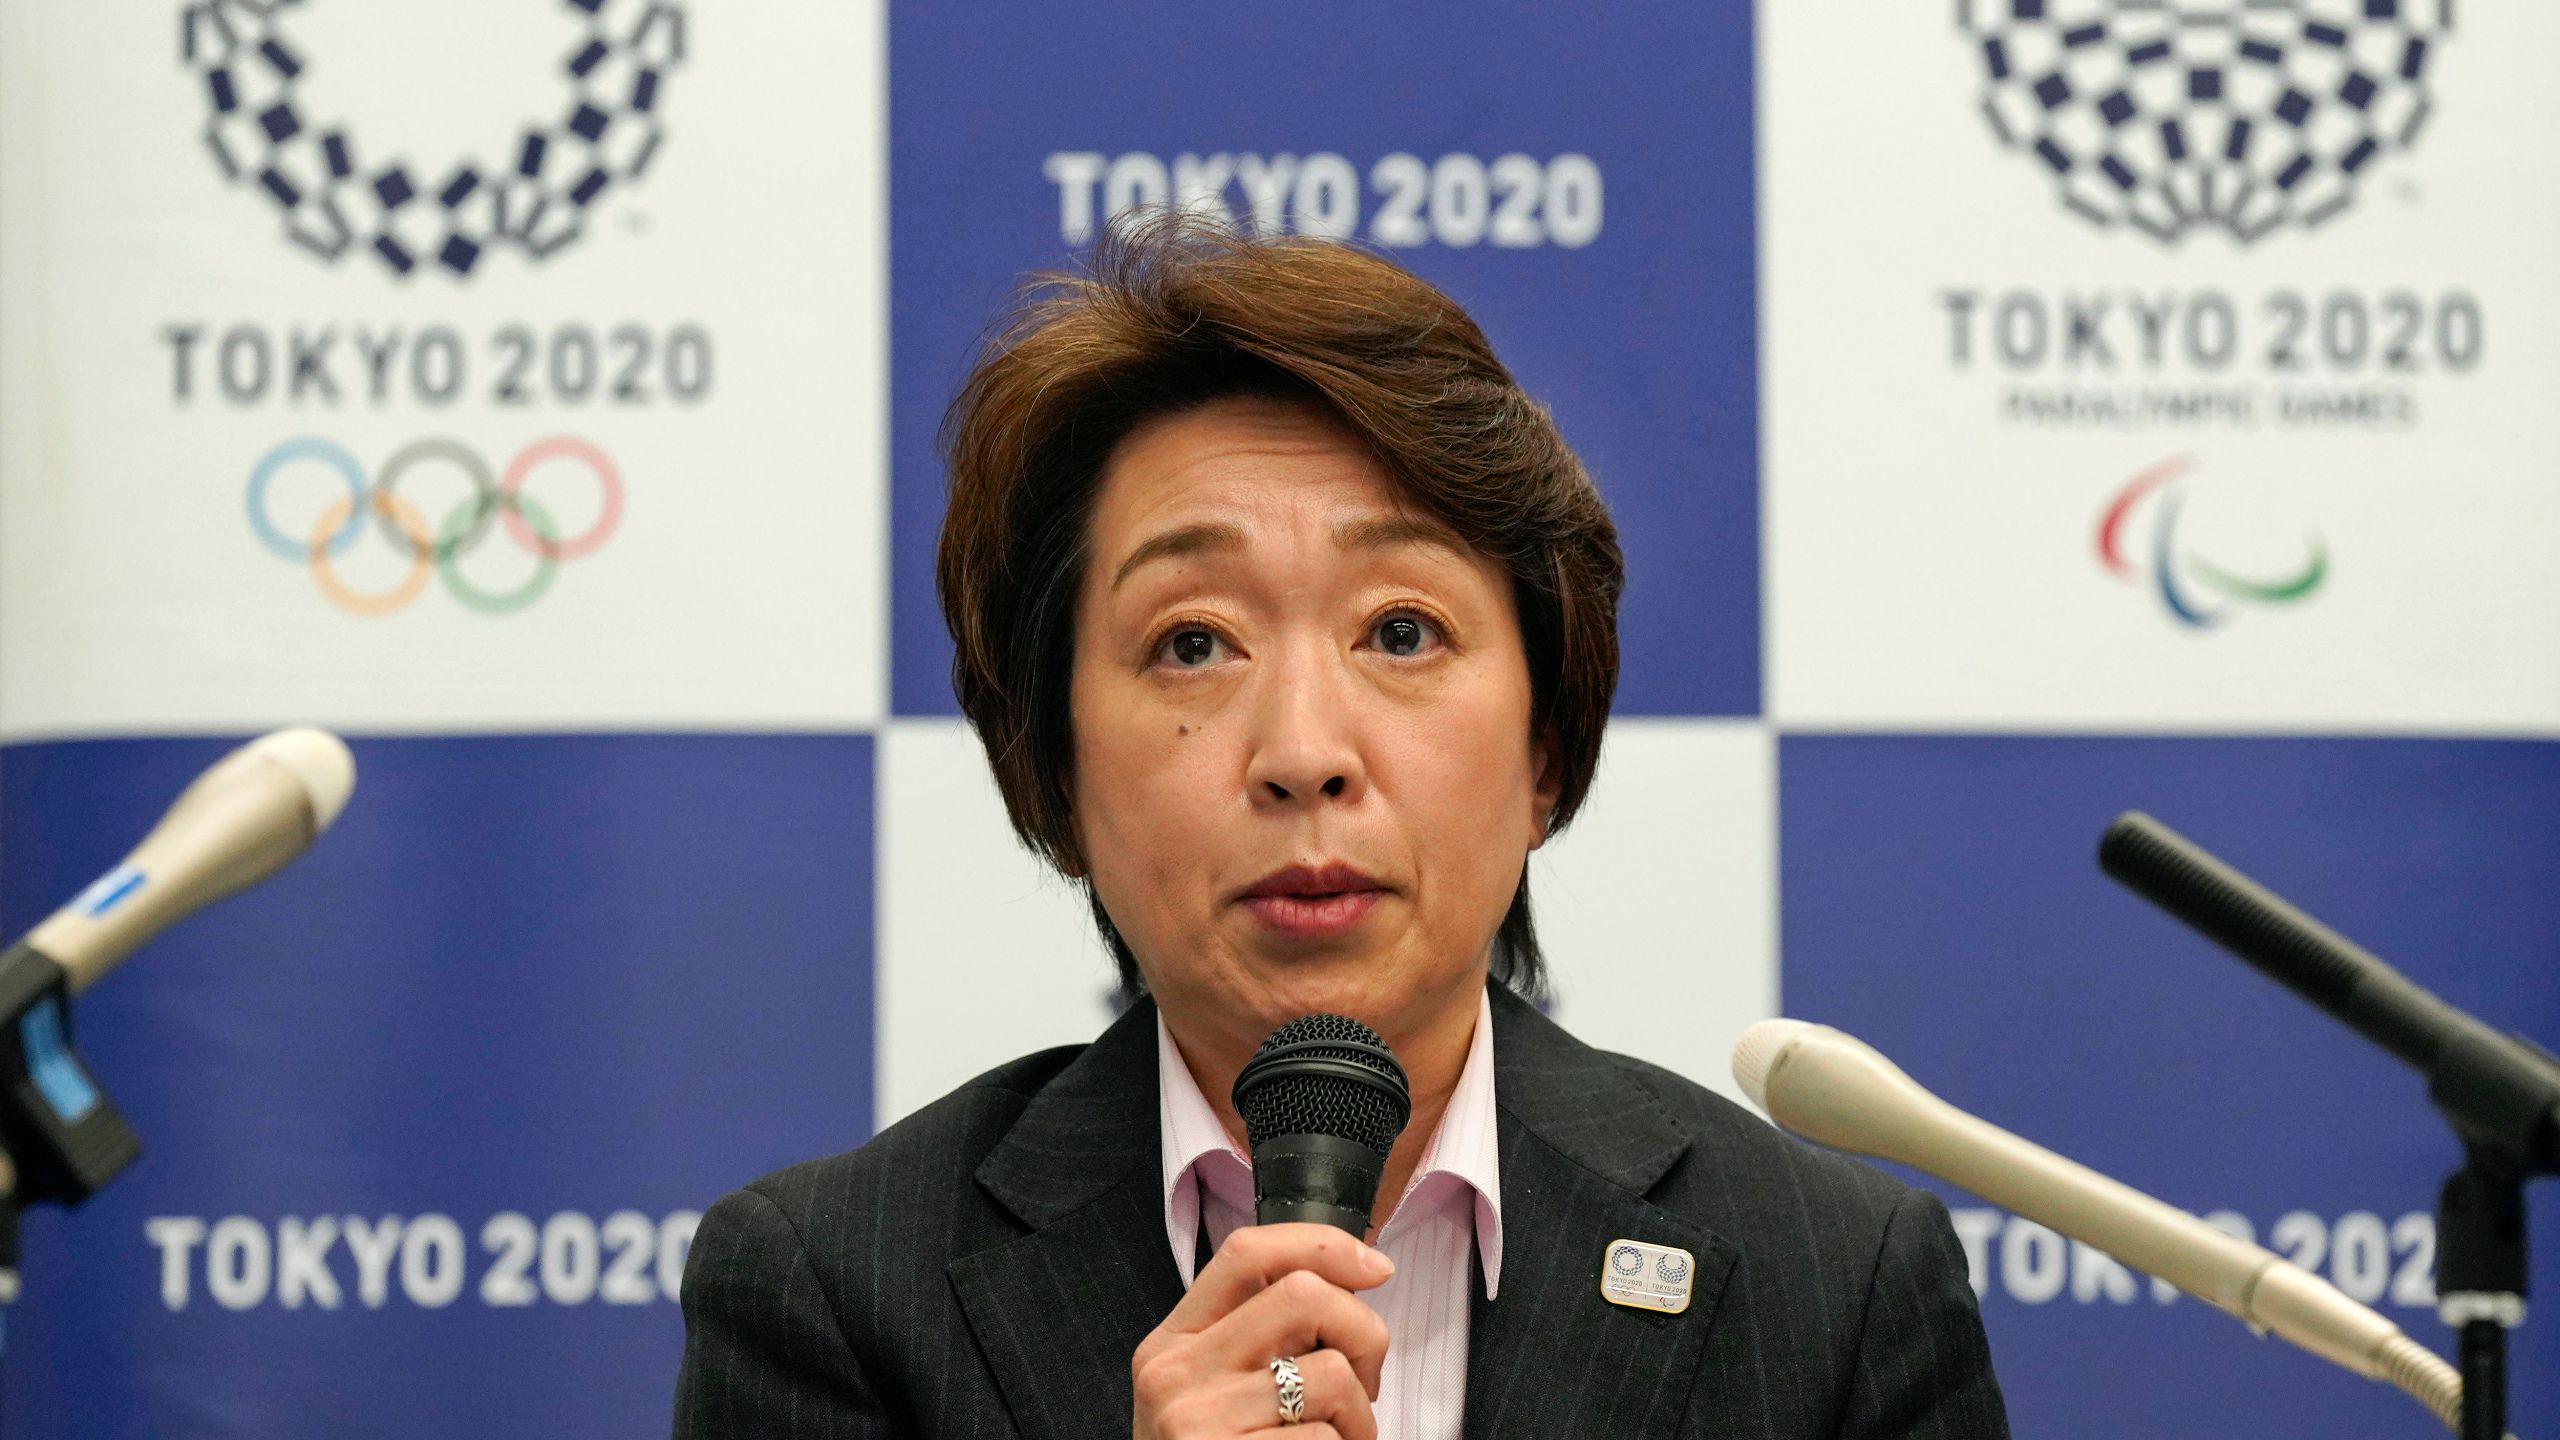 Japan to decide on overseas fans attendance at Tokyo Olympics by end of month